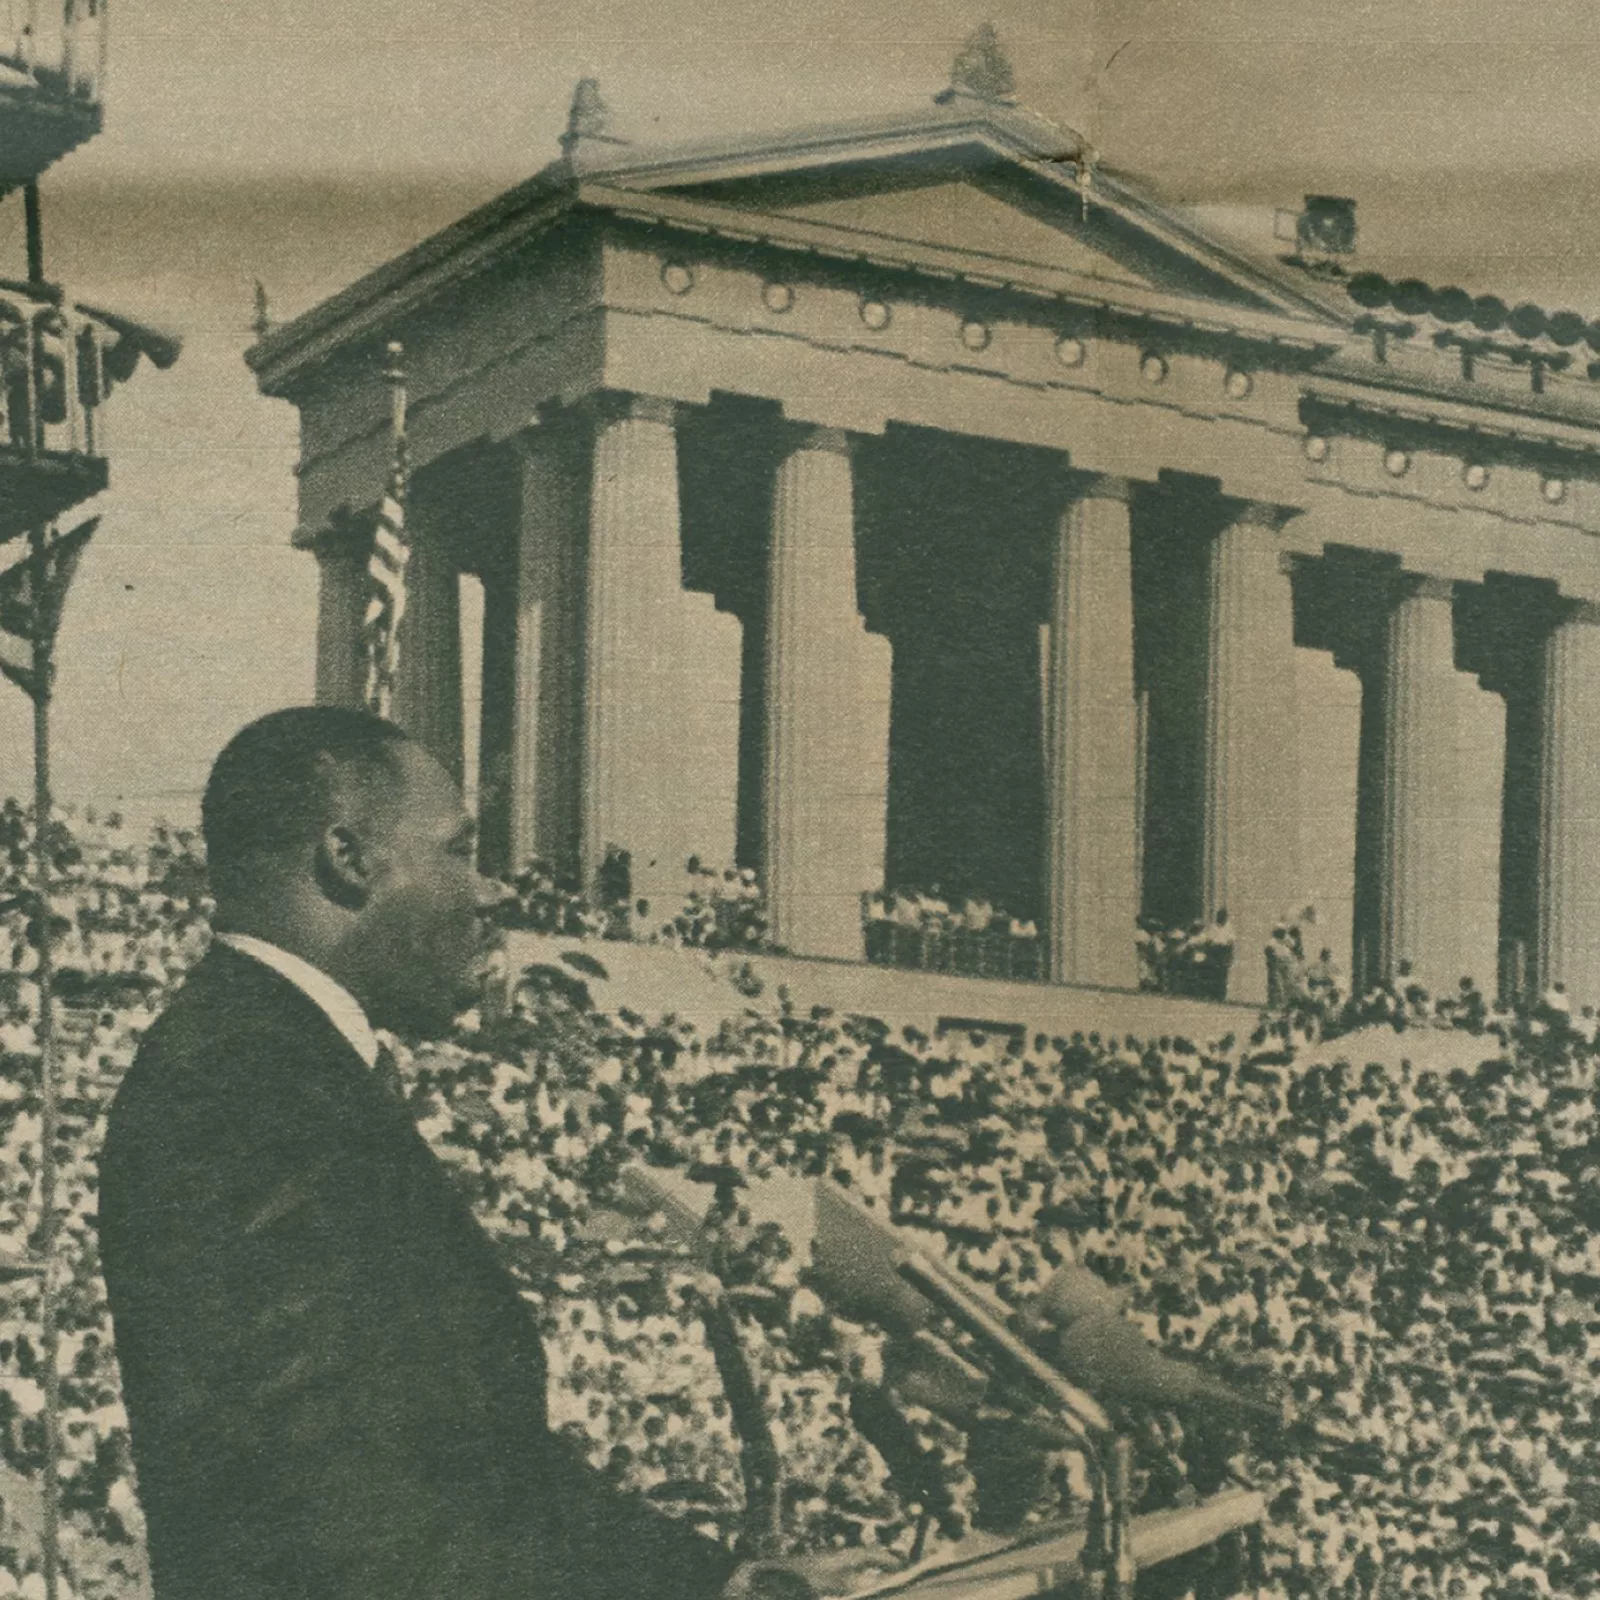 Martin Luther King Jr., speaking at Soldier Field in Chicago. June 21, 1964. From the Chicago Sun-Times. Midwest MS Field Enterprises: Box 69, Folder 978.